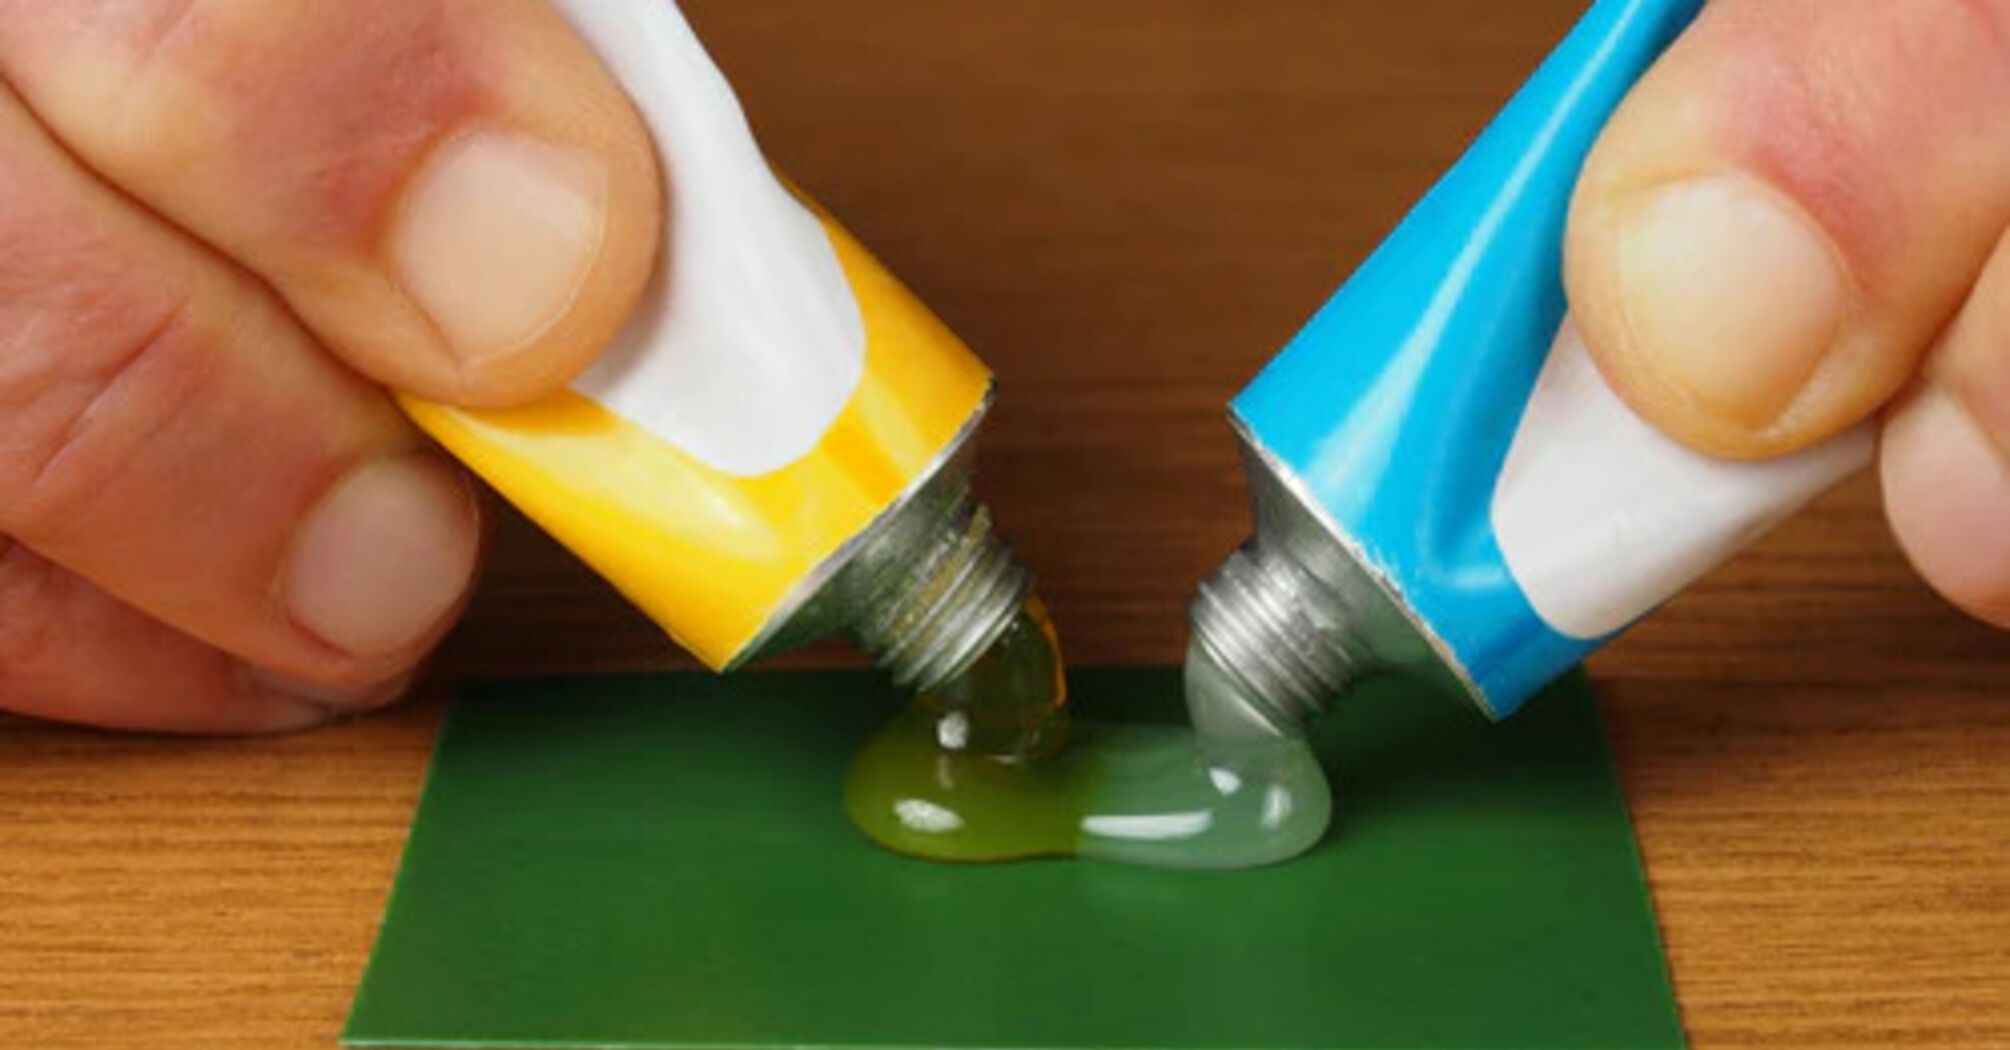 How to glue plastic tightly